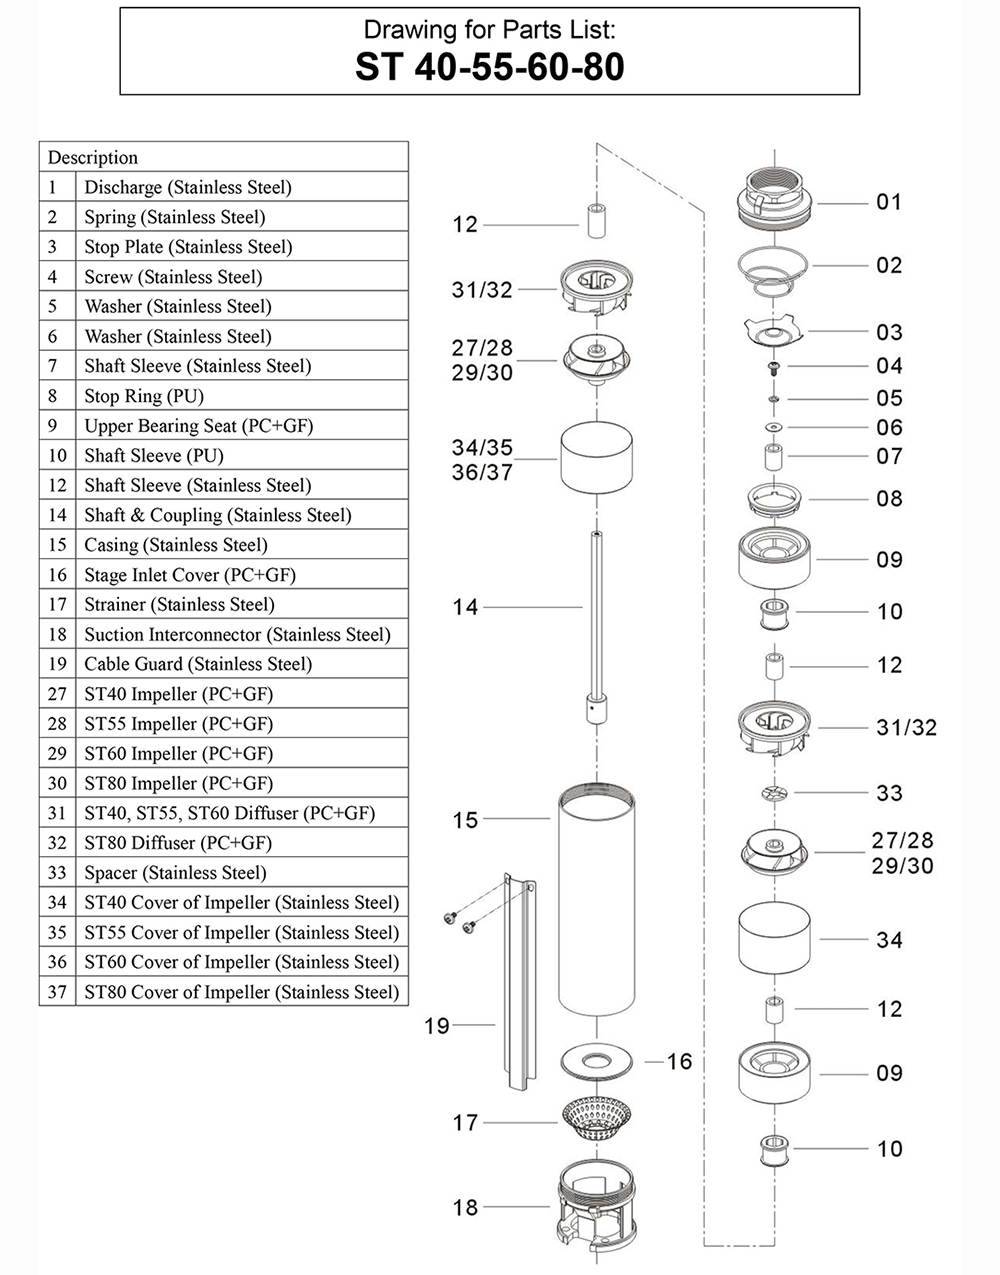 Submersible Pump Spare Parts List - Infoupdate.org